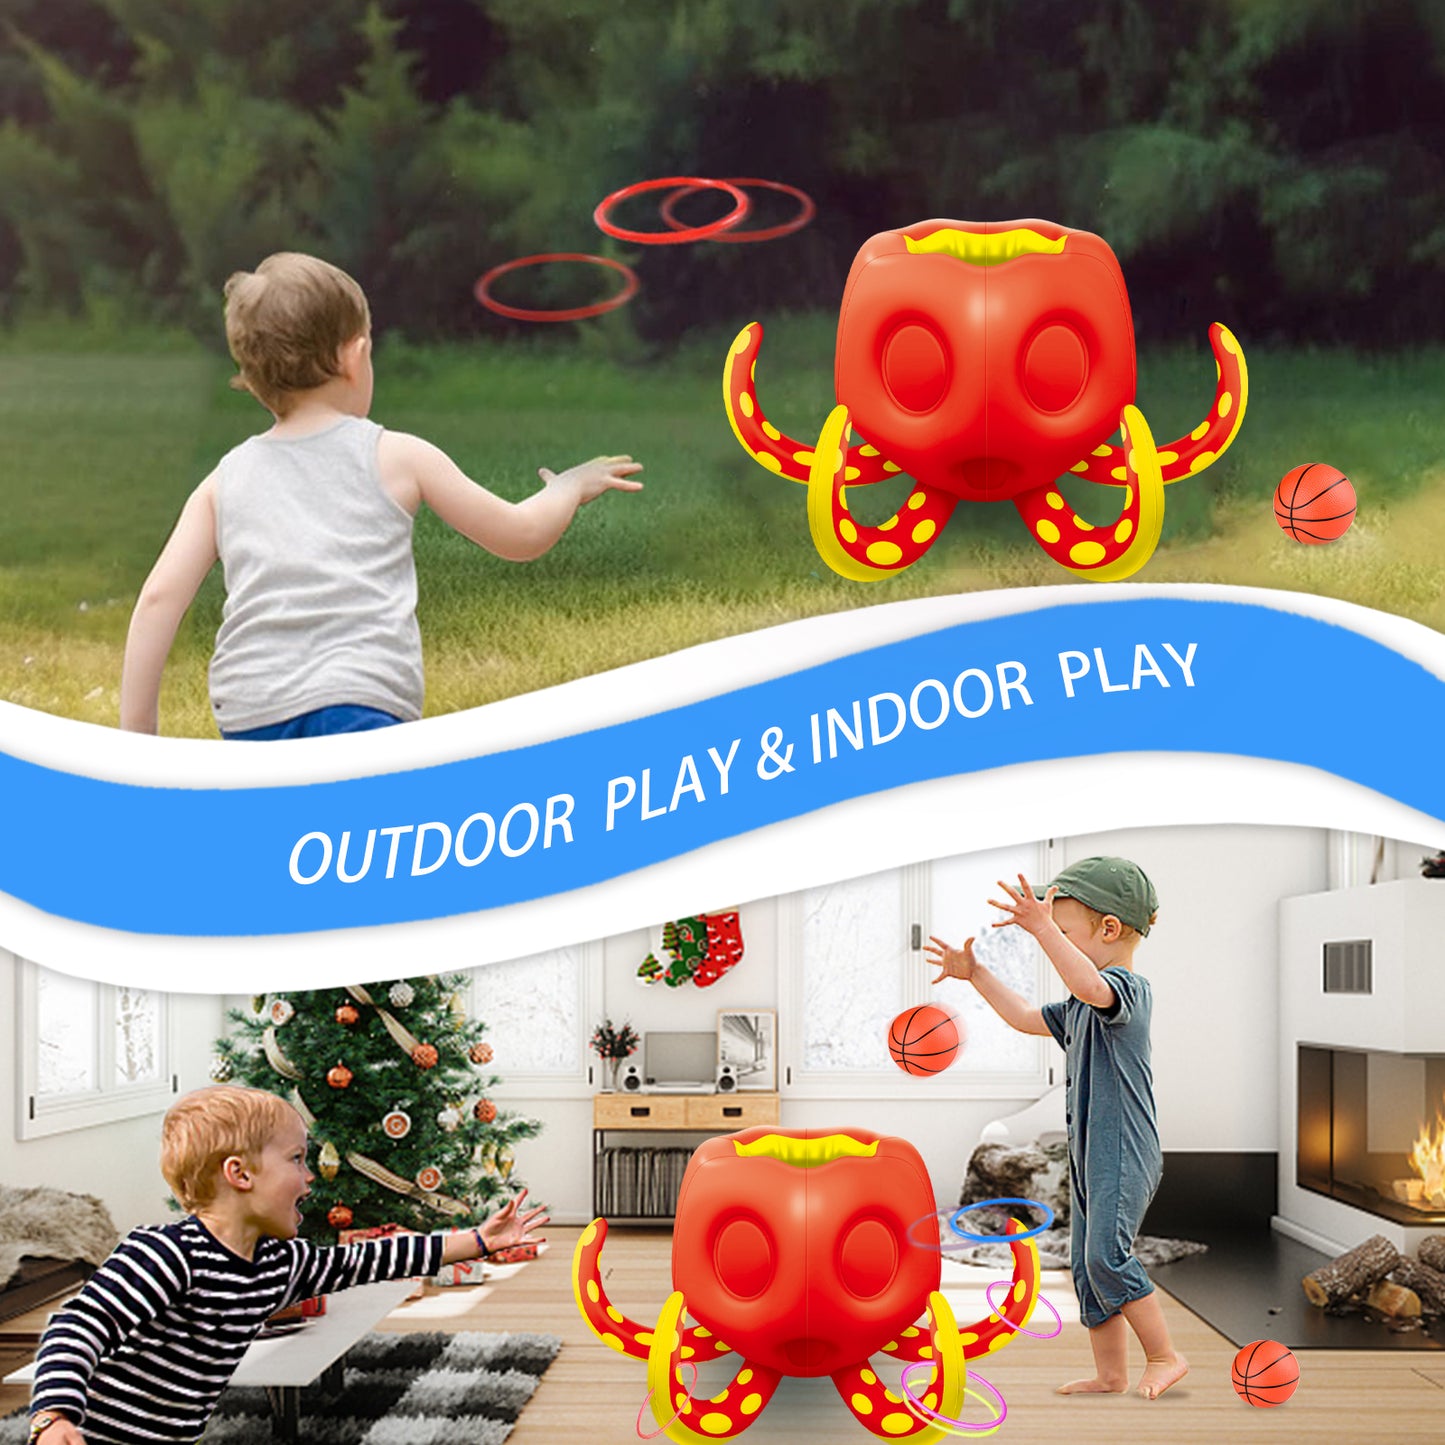 Octopus Pool Toys, Inflatable Basketball Hoop| Ring Toss Game for Indoor Outdoor Play, Cool Summer Toys for Ages 3 4 5 6 7 8 Year Old Boys Girls Adults Family Party Gift